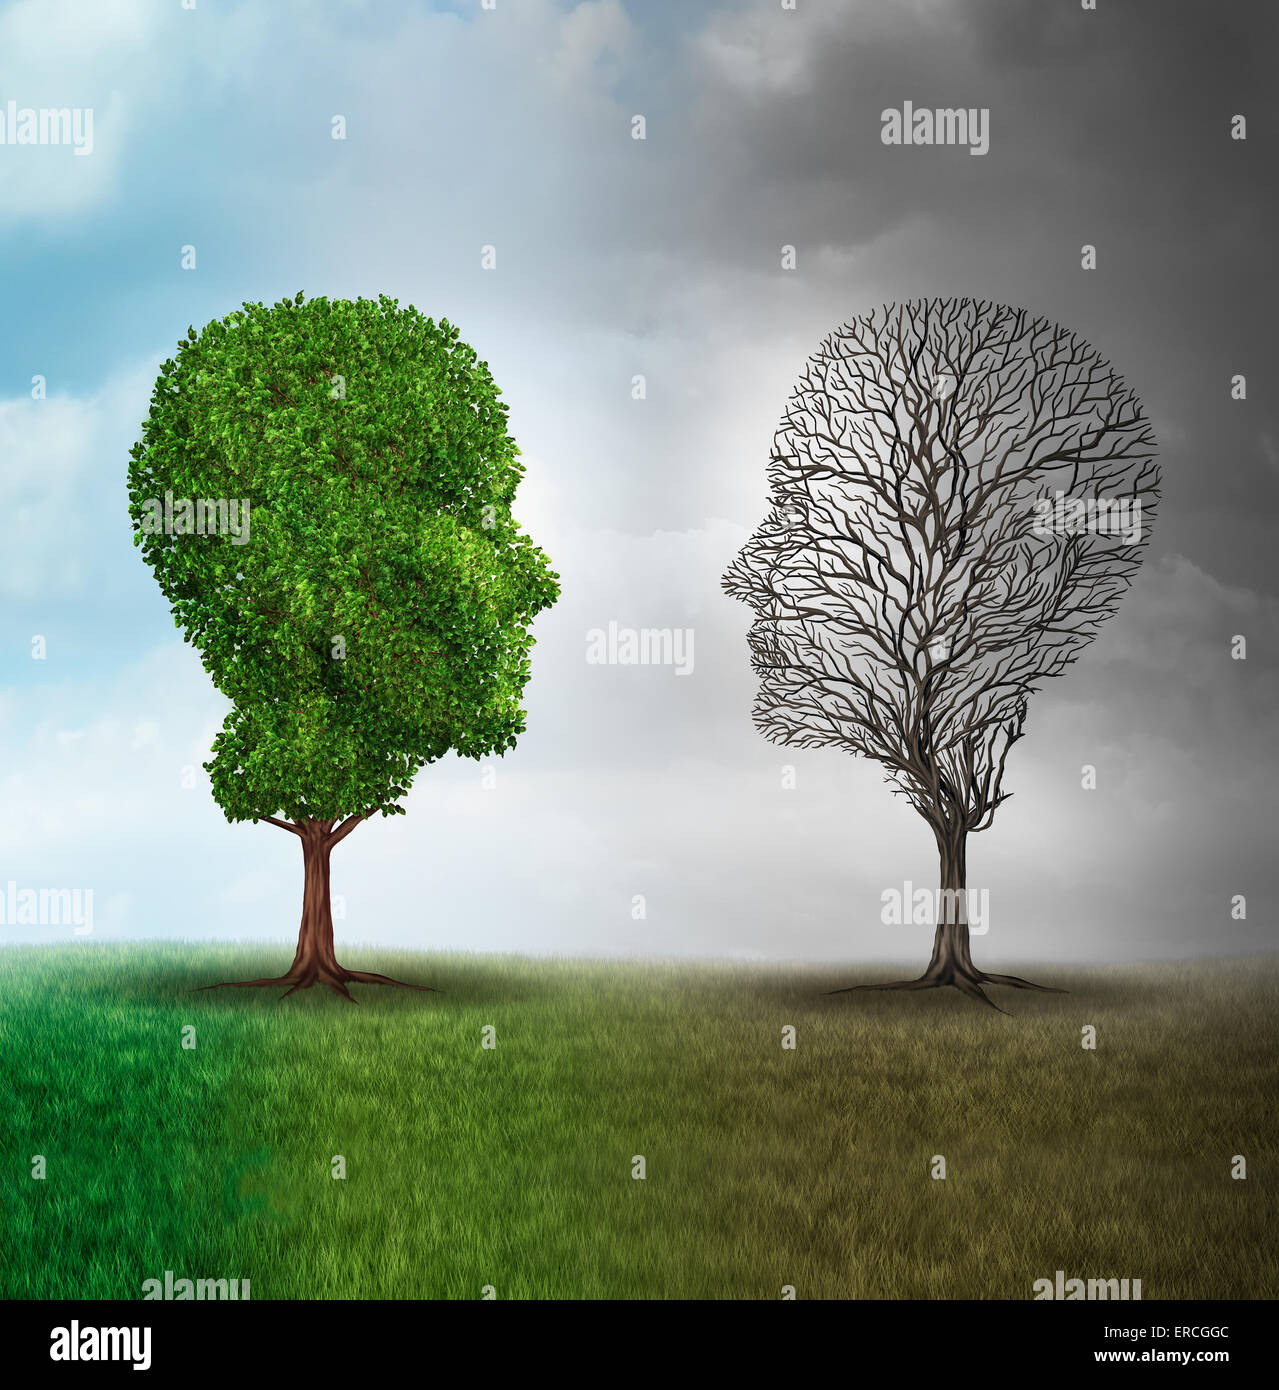 Human mood and emotion disorder concept as a tree shaped as two human faces with one half full of leaves and the opposite side empty branches as a medical metaphor for psychological contrast in feelings. Stock Photo